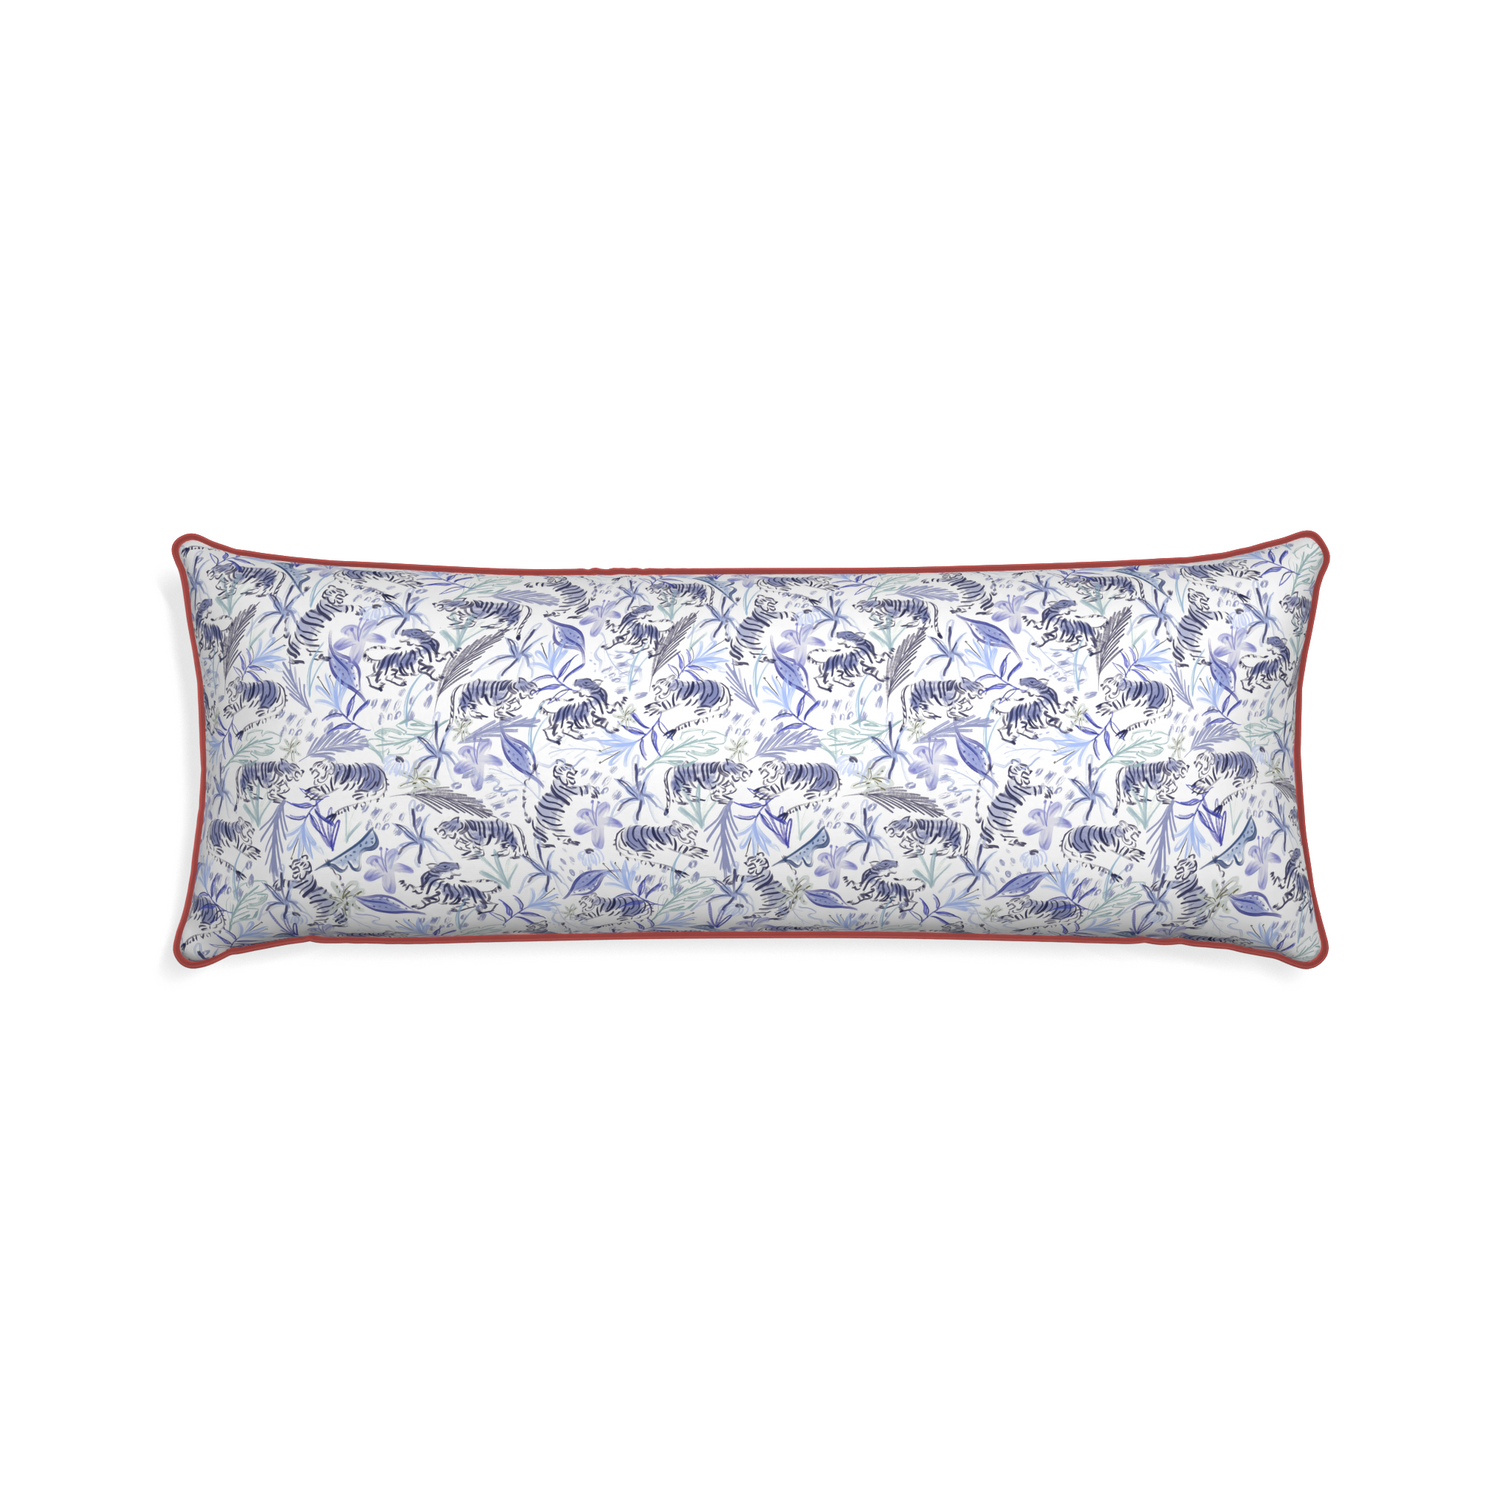 Xl-lumbar frida blue custom blue with intricate tiger designpillow with c piping on white background